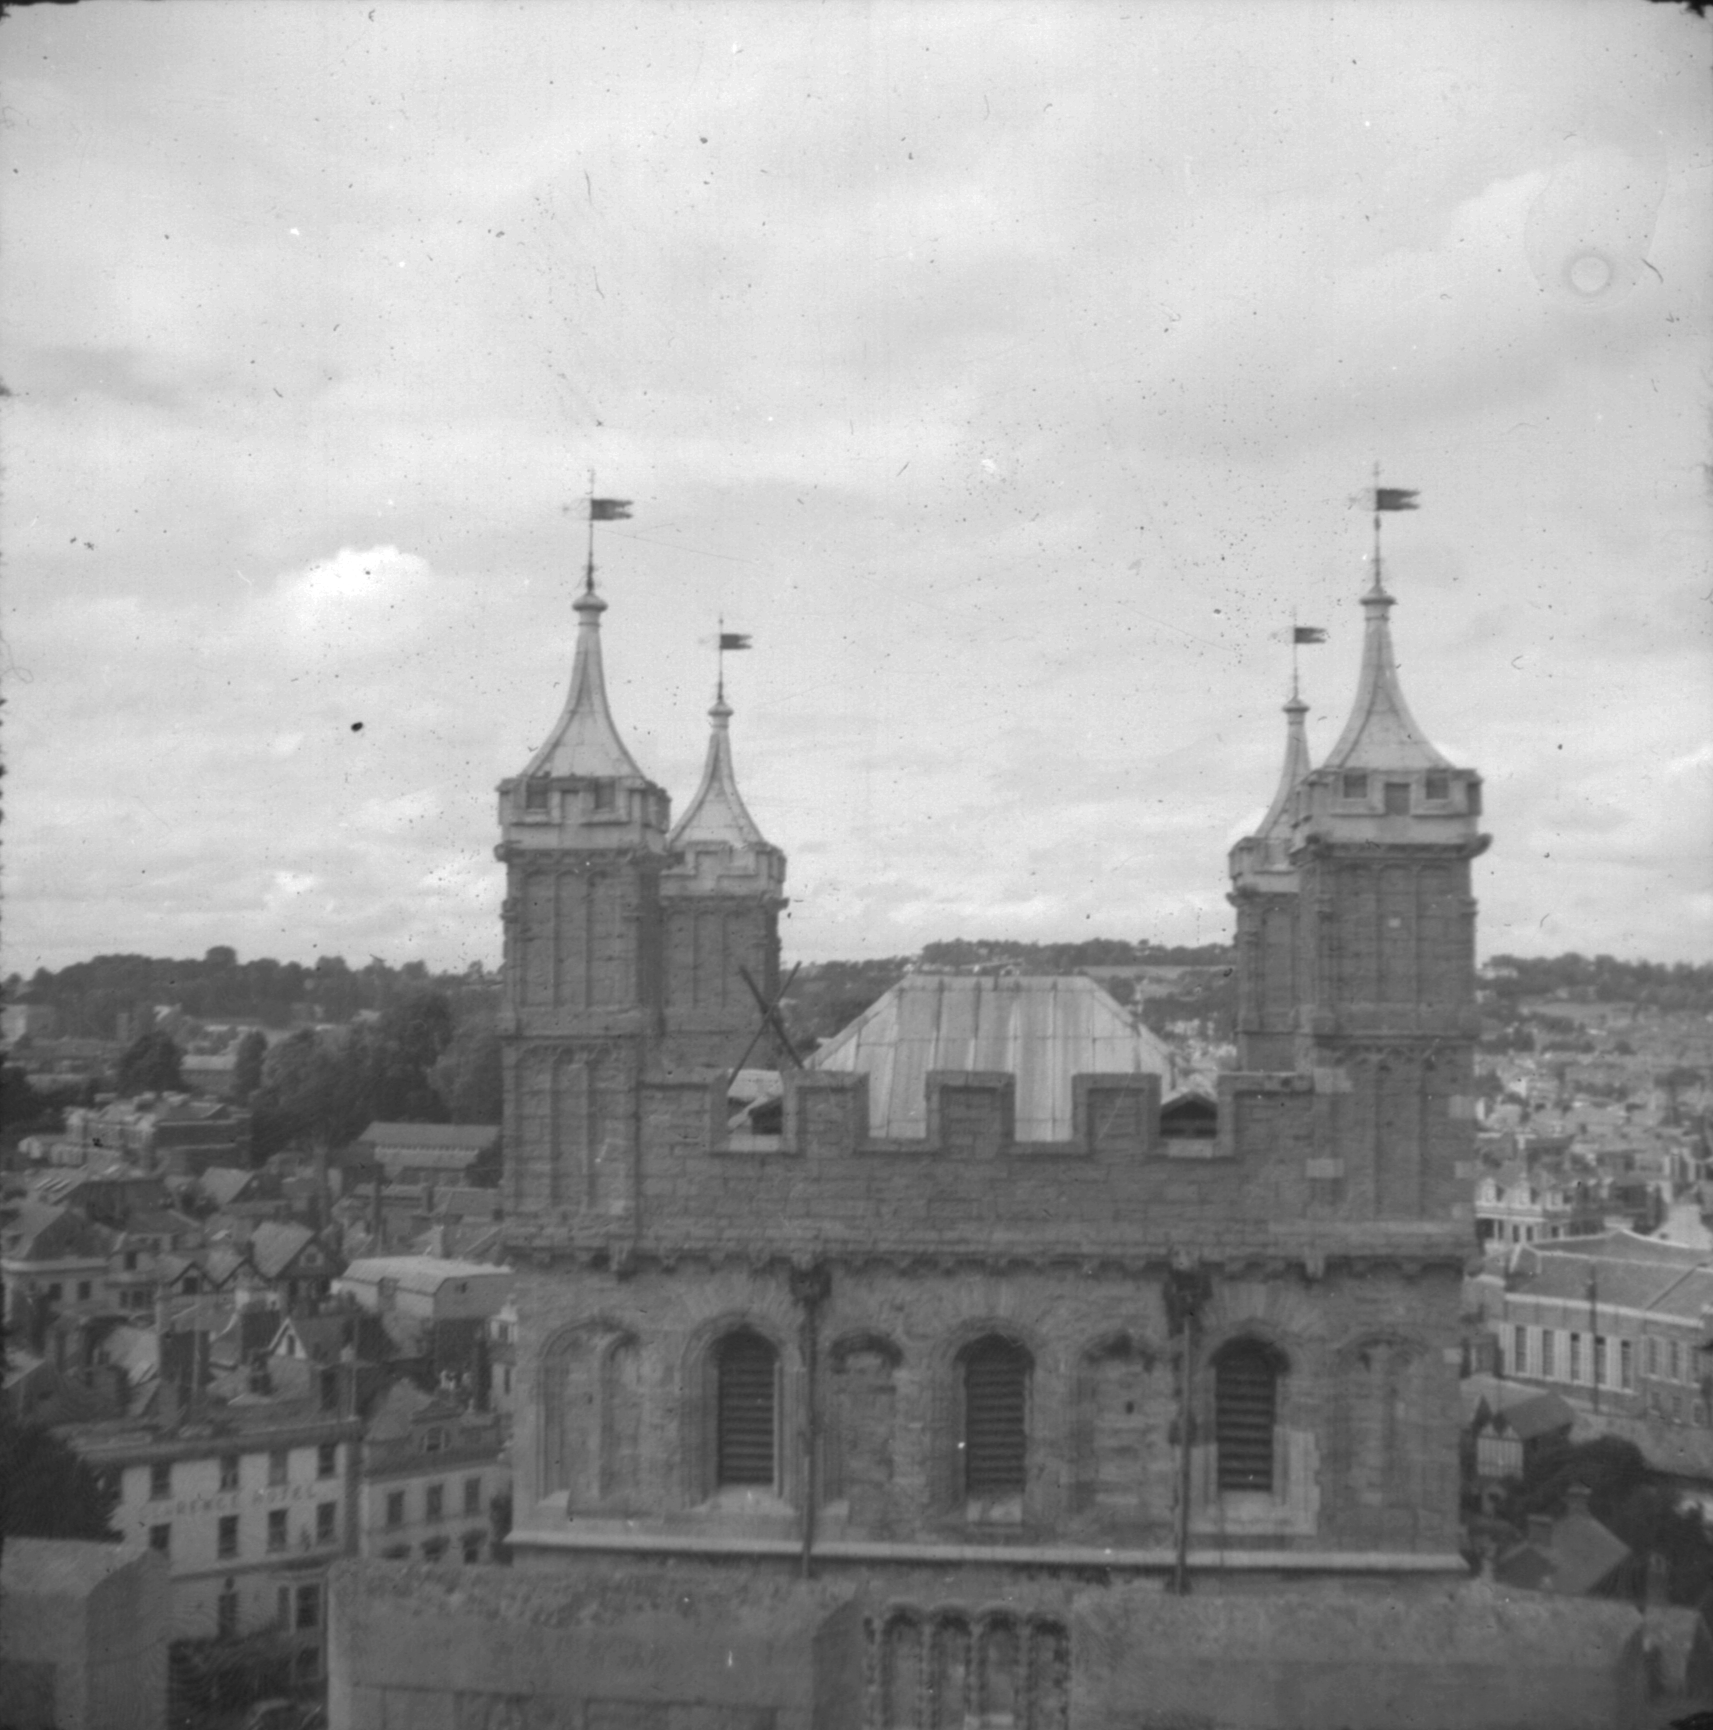 North tower from South tower. August 1941.